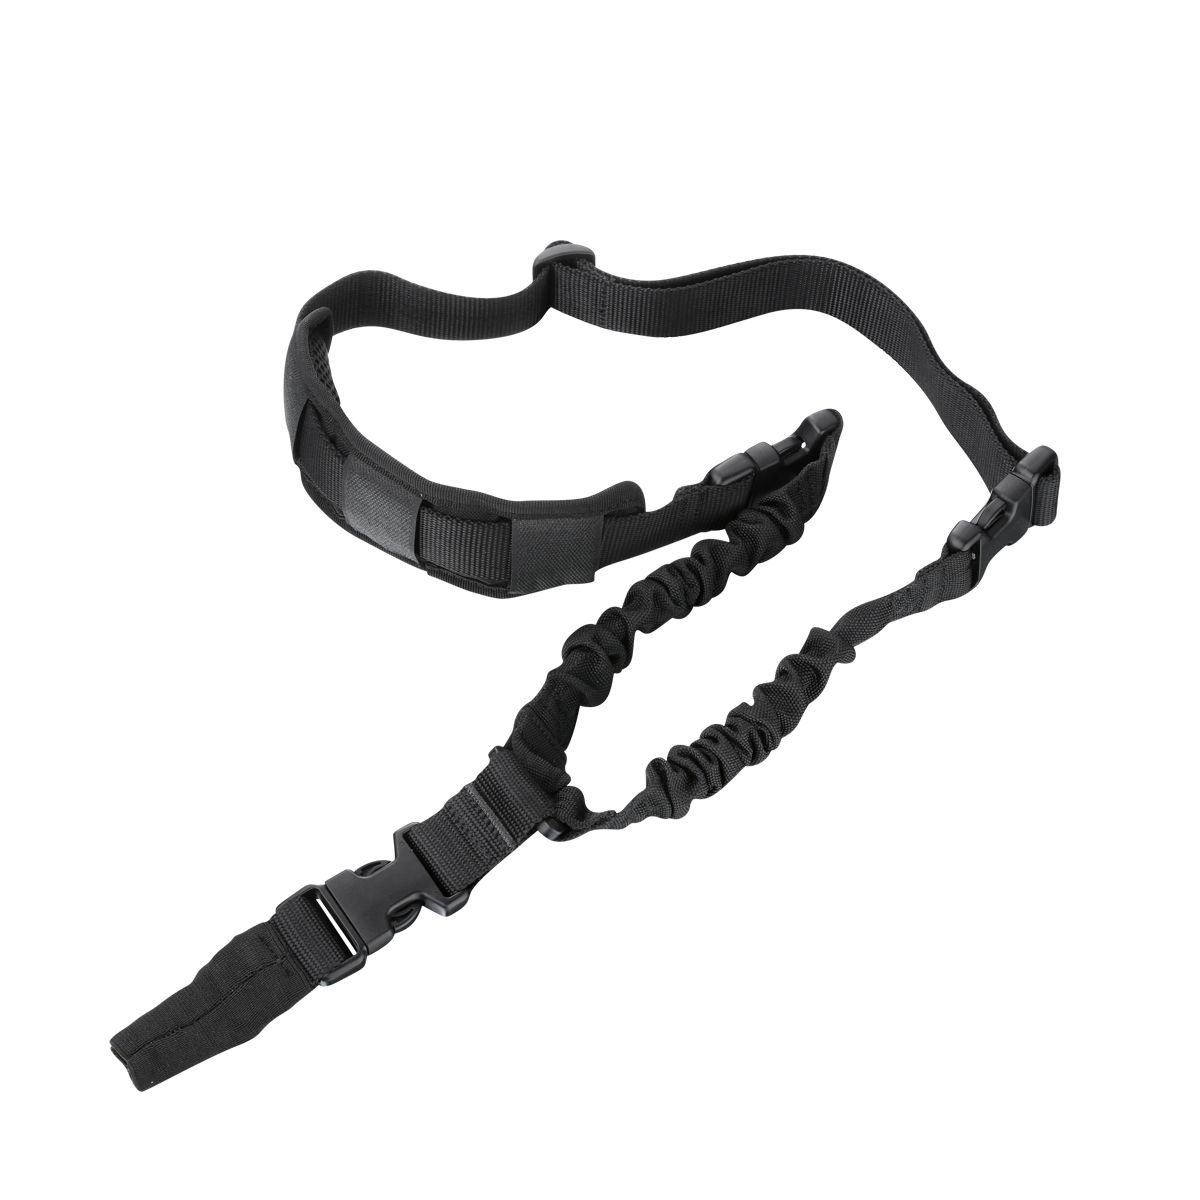 Cytac - CY-2PT-SH Heavy Duty Two Point Nylon Sling with Hook